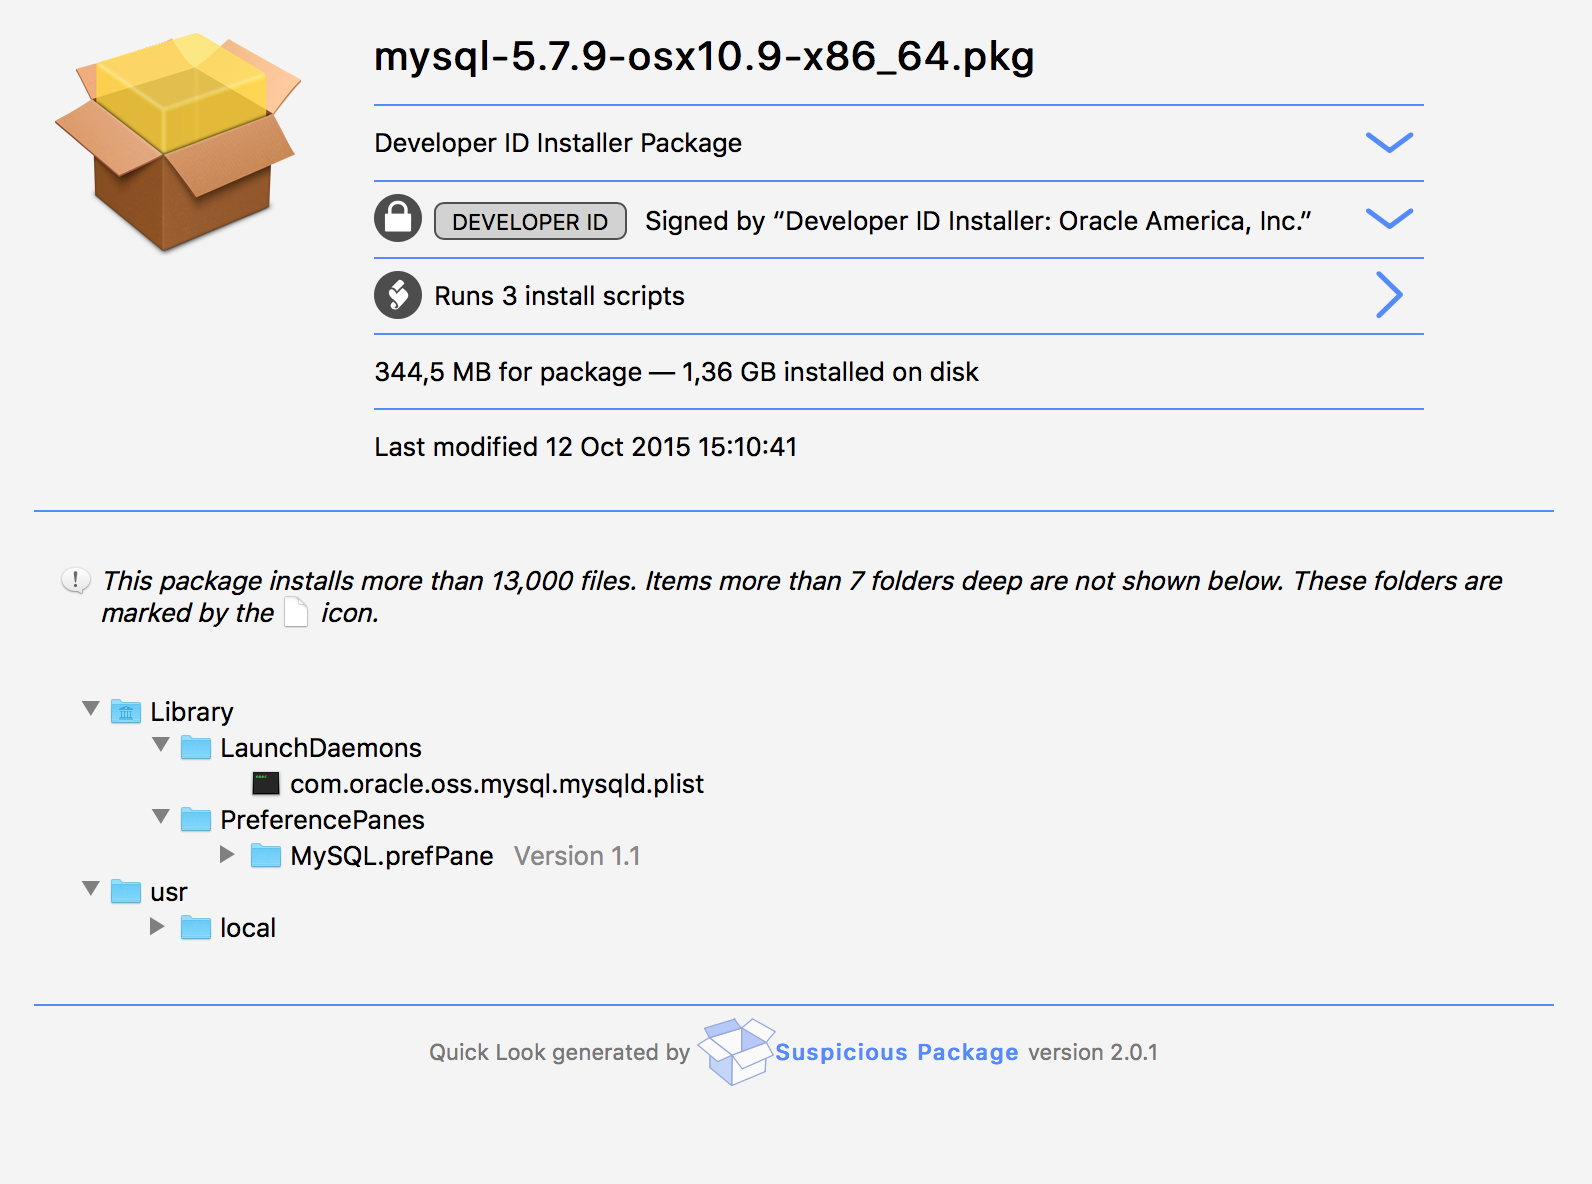 Yes 1.32GB once installed (and wrong OSX version naming)